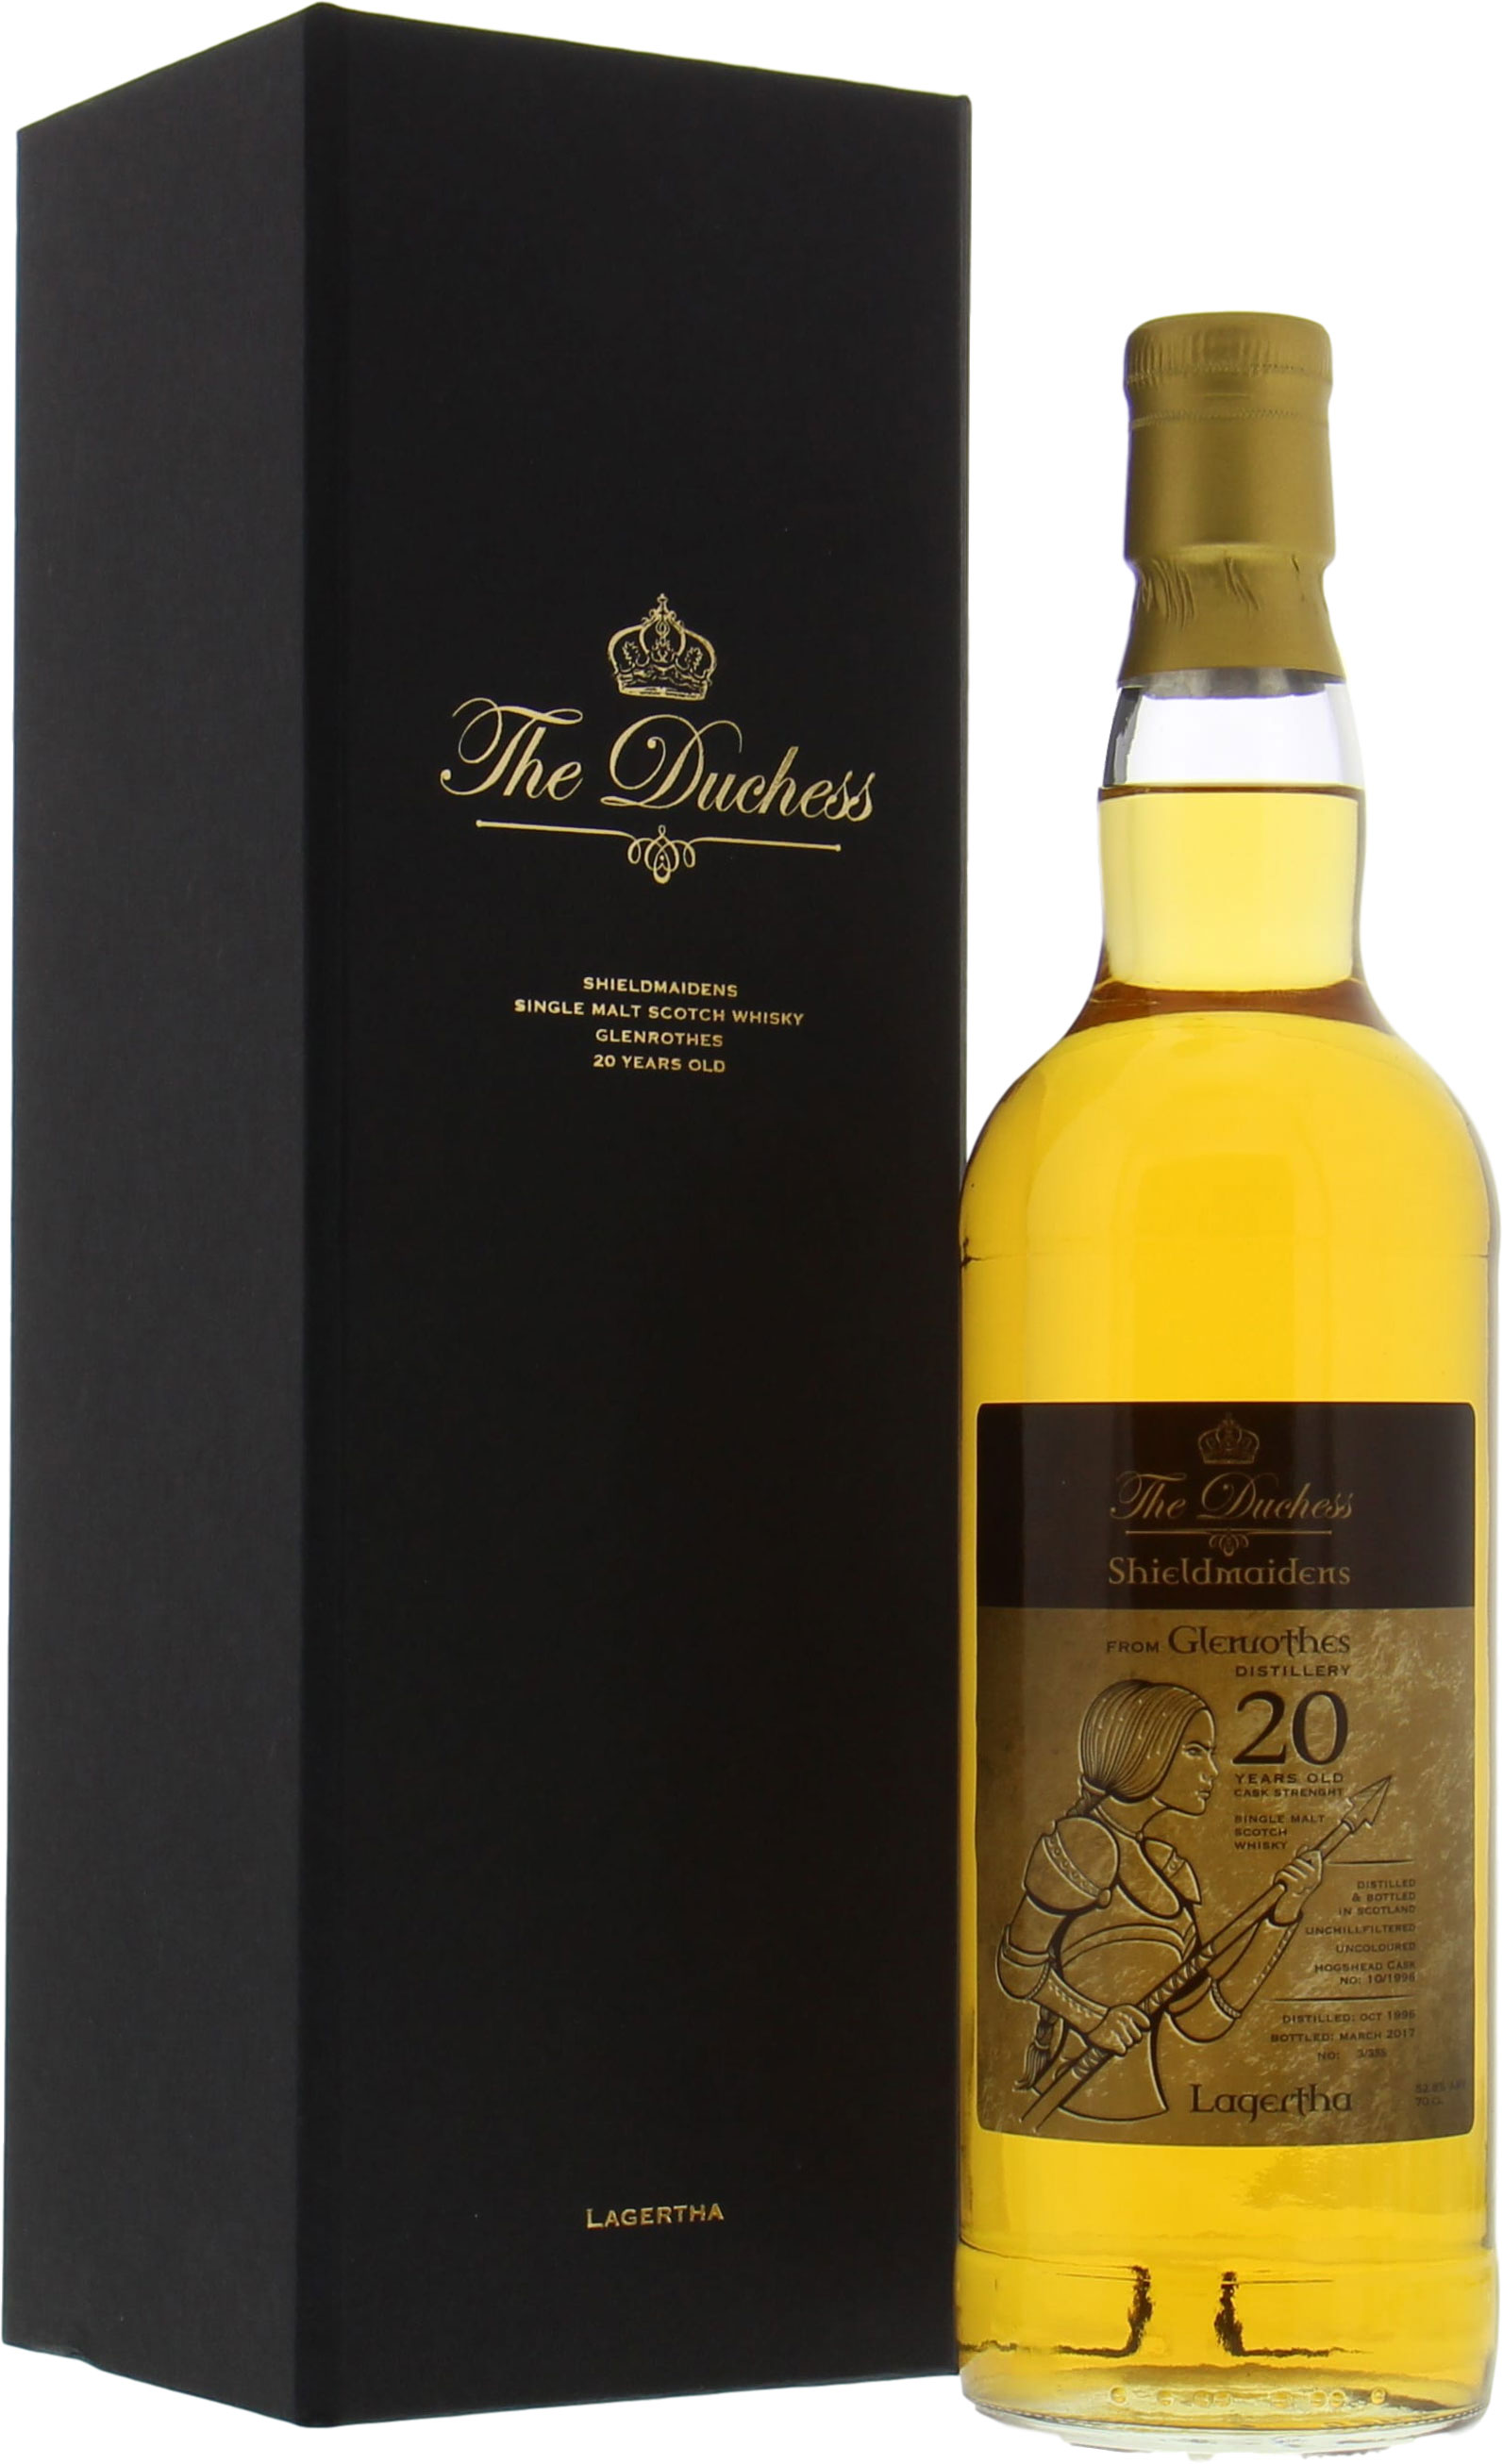 Glenrothes - 20 Years Old The Duchess Shieldmaiden Lagertha Cask10/1996 52.8% 1996